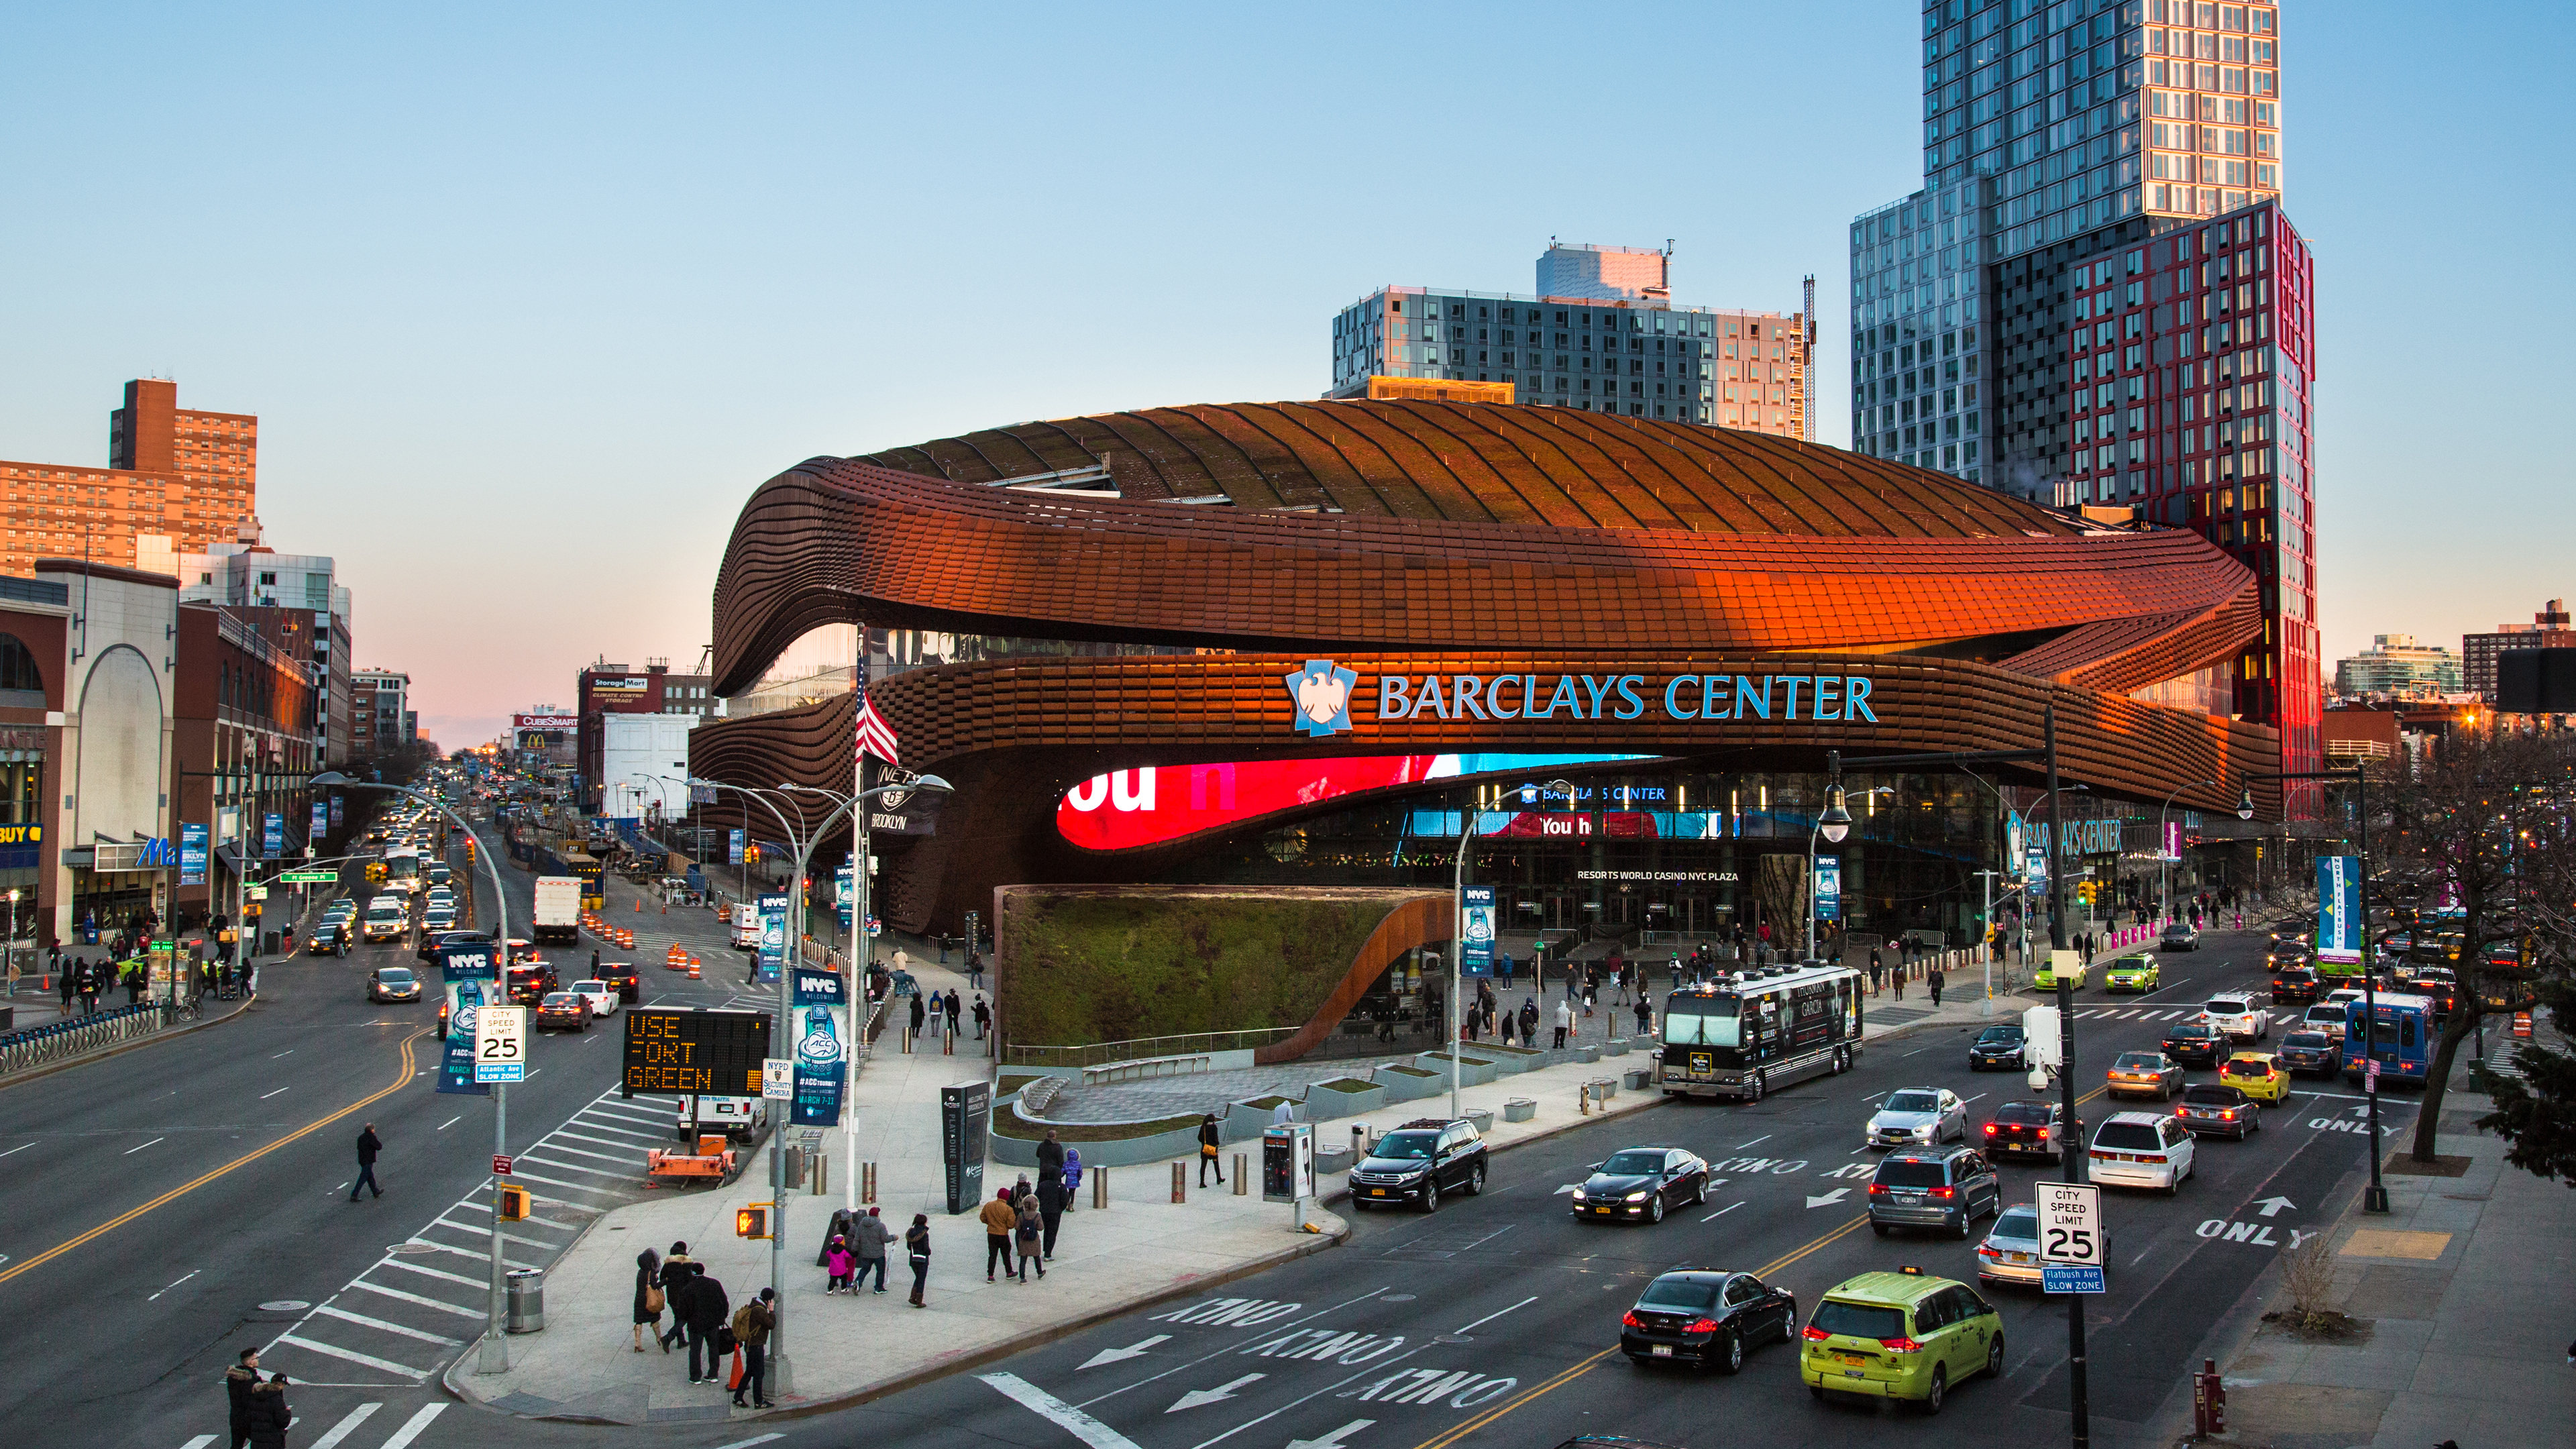 Barclays Center opens sensory room to help those with 'invisible